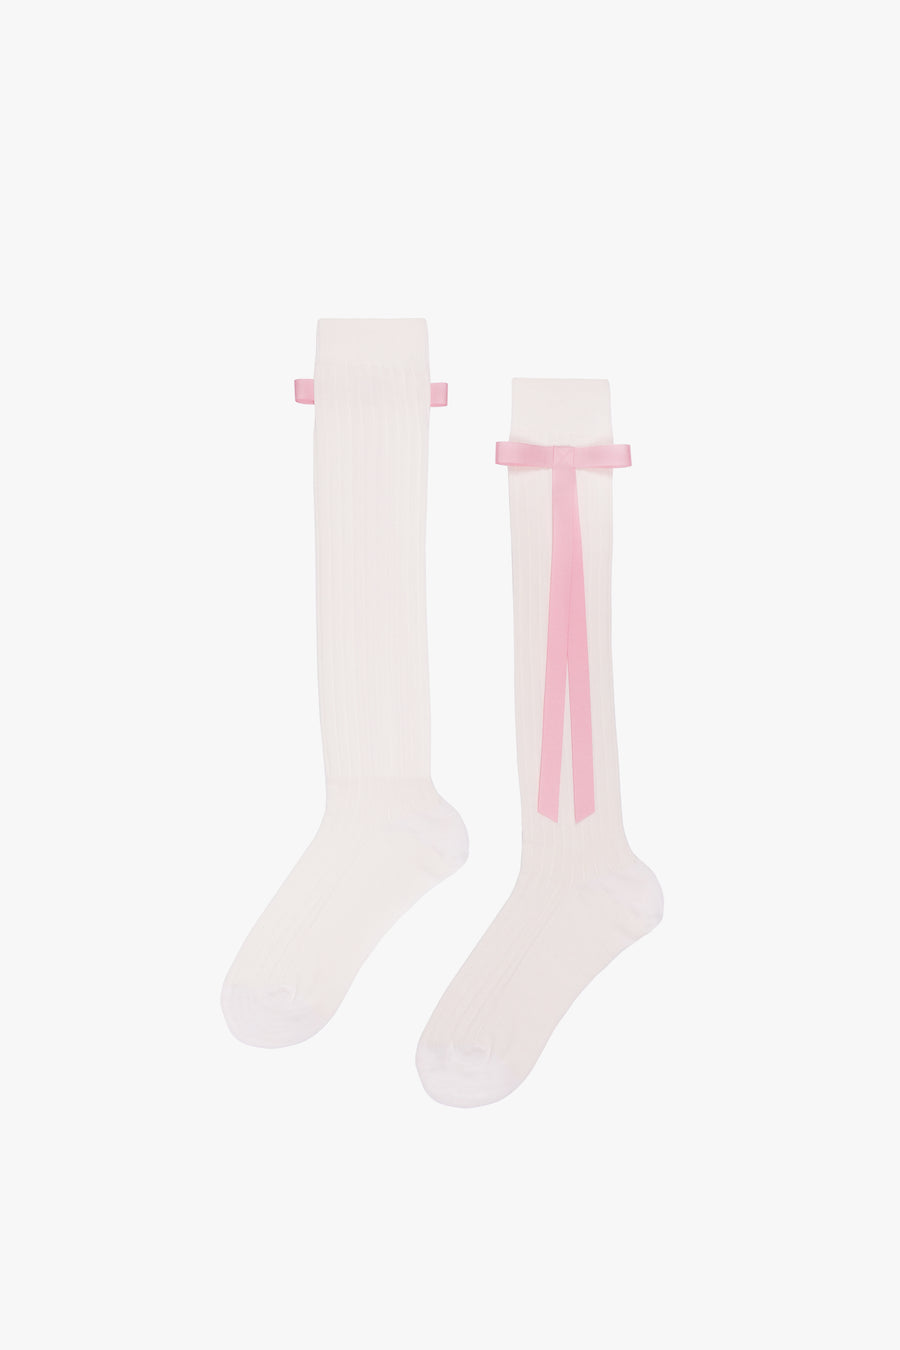 Cotton blend knee high socks in off white with pink long satin bows at side